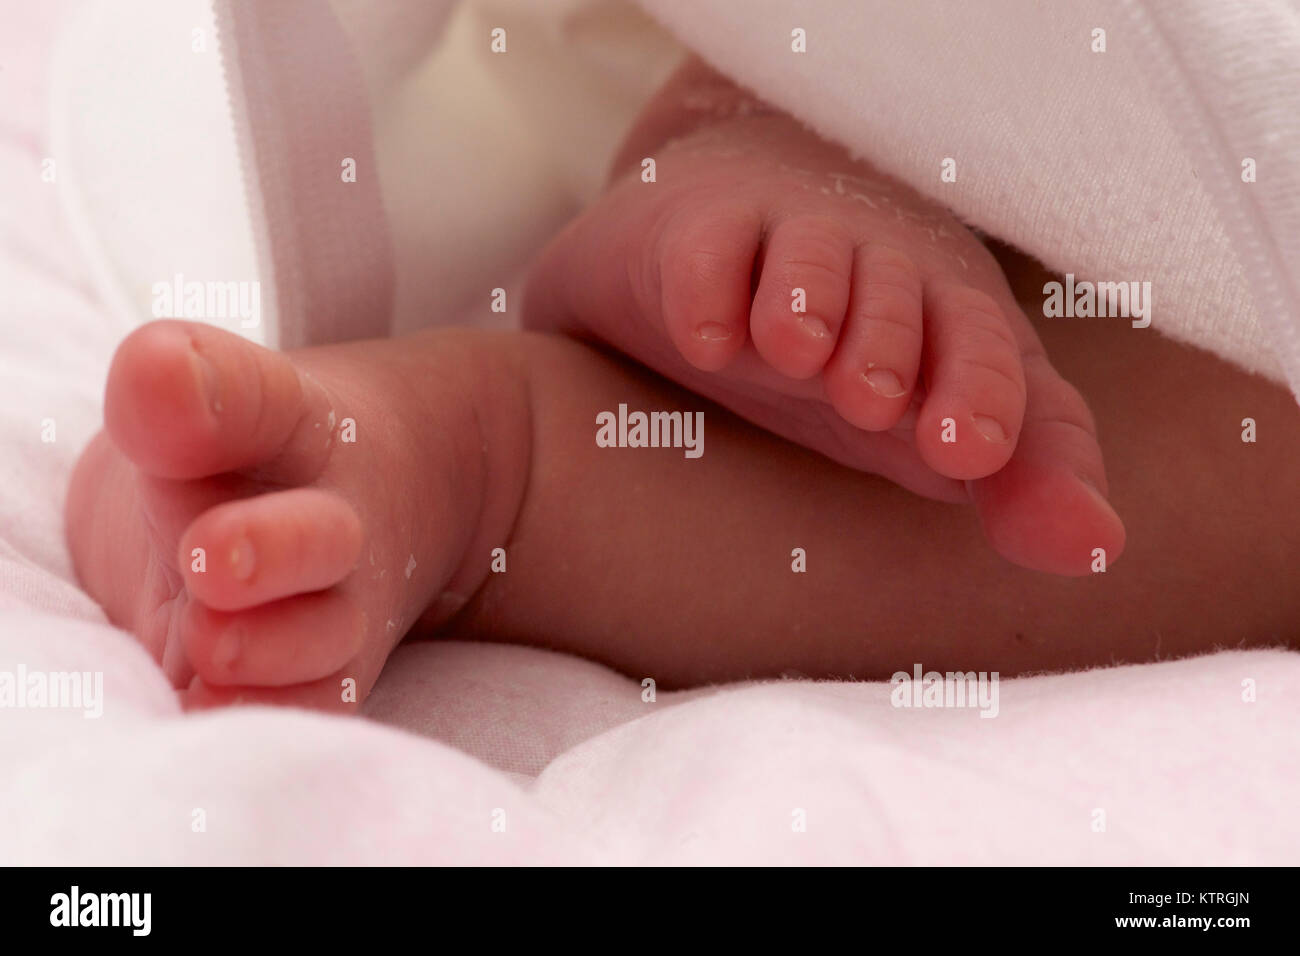 Lovely feet of a newborn female baby at hospital. Stock Photo